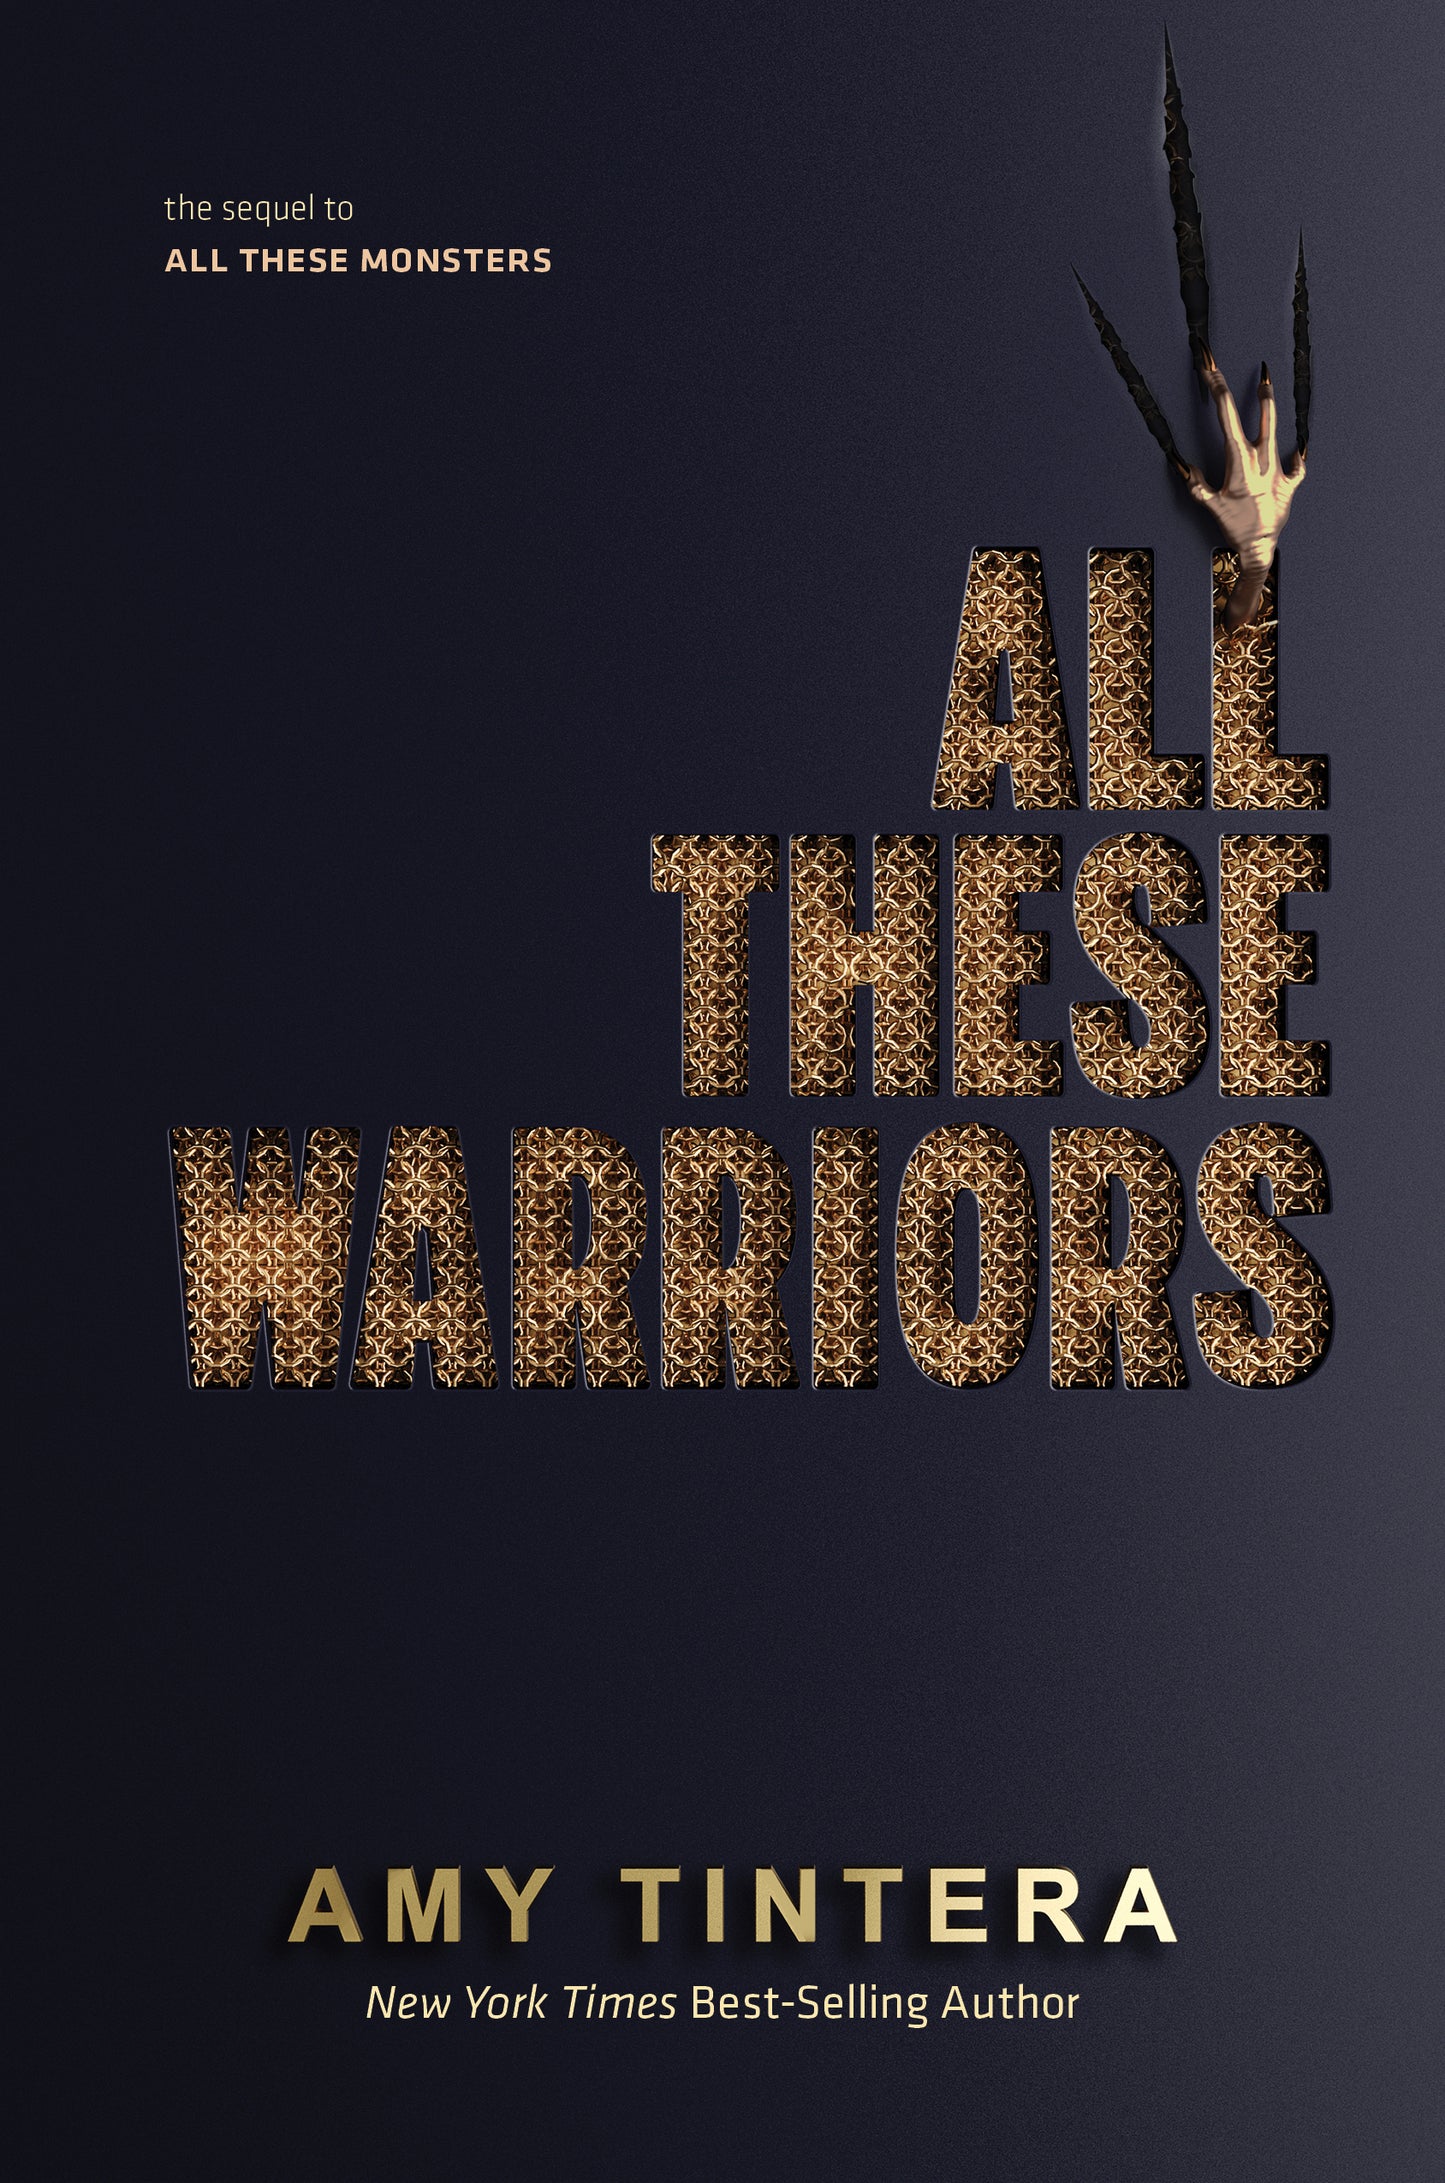 All These Warriors (#2) - Amy Tintera